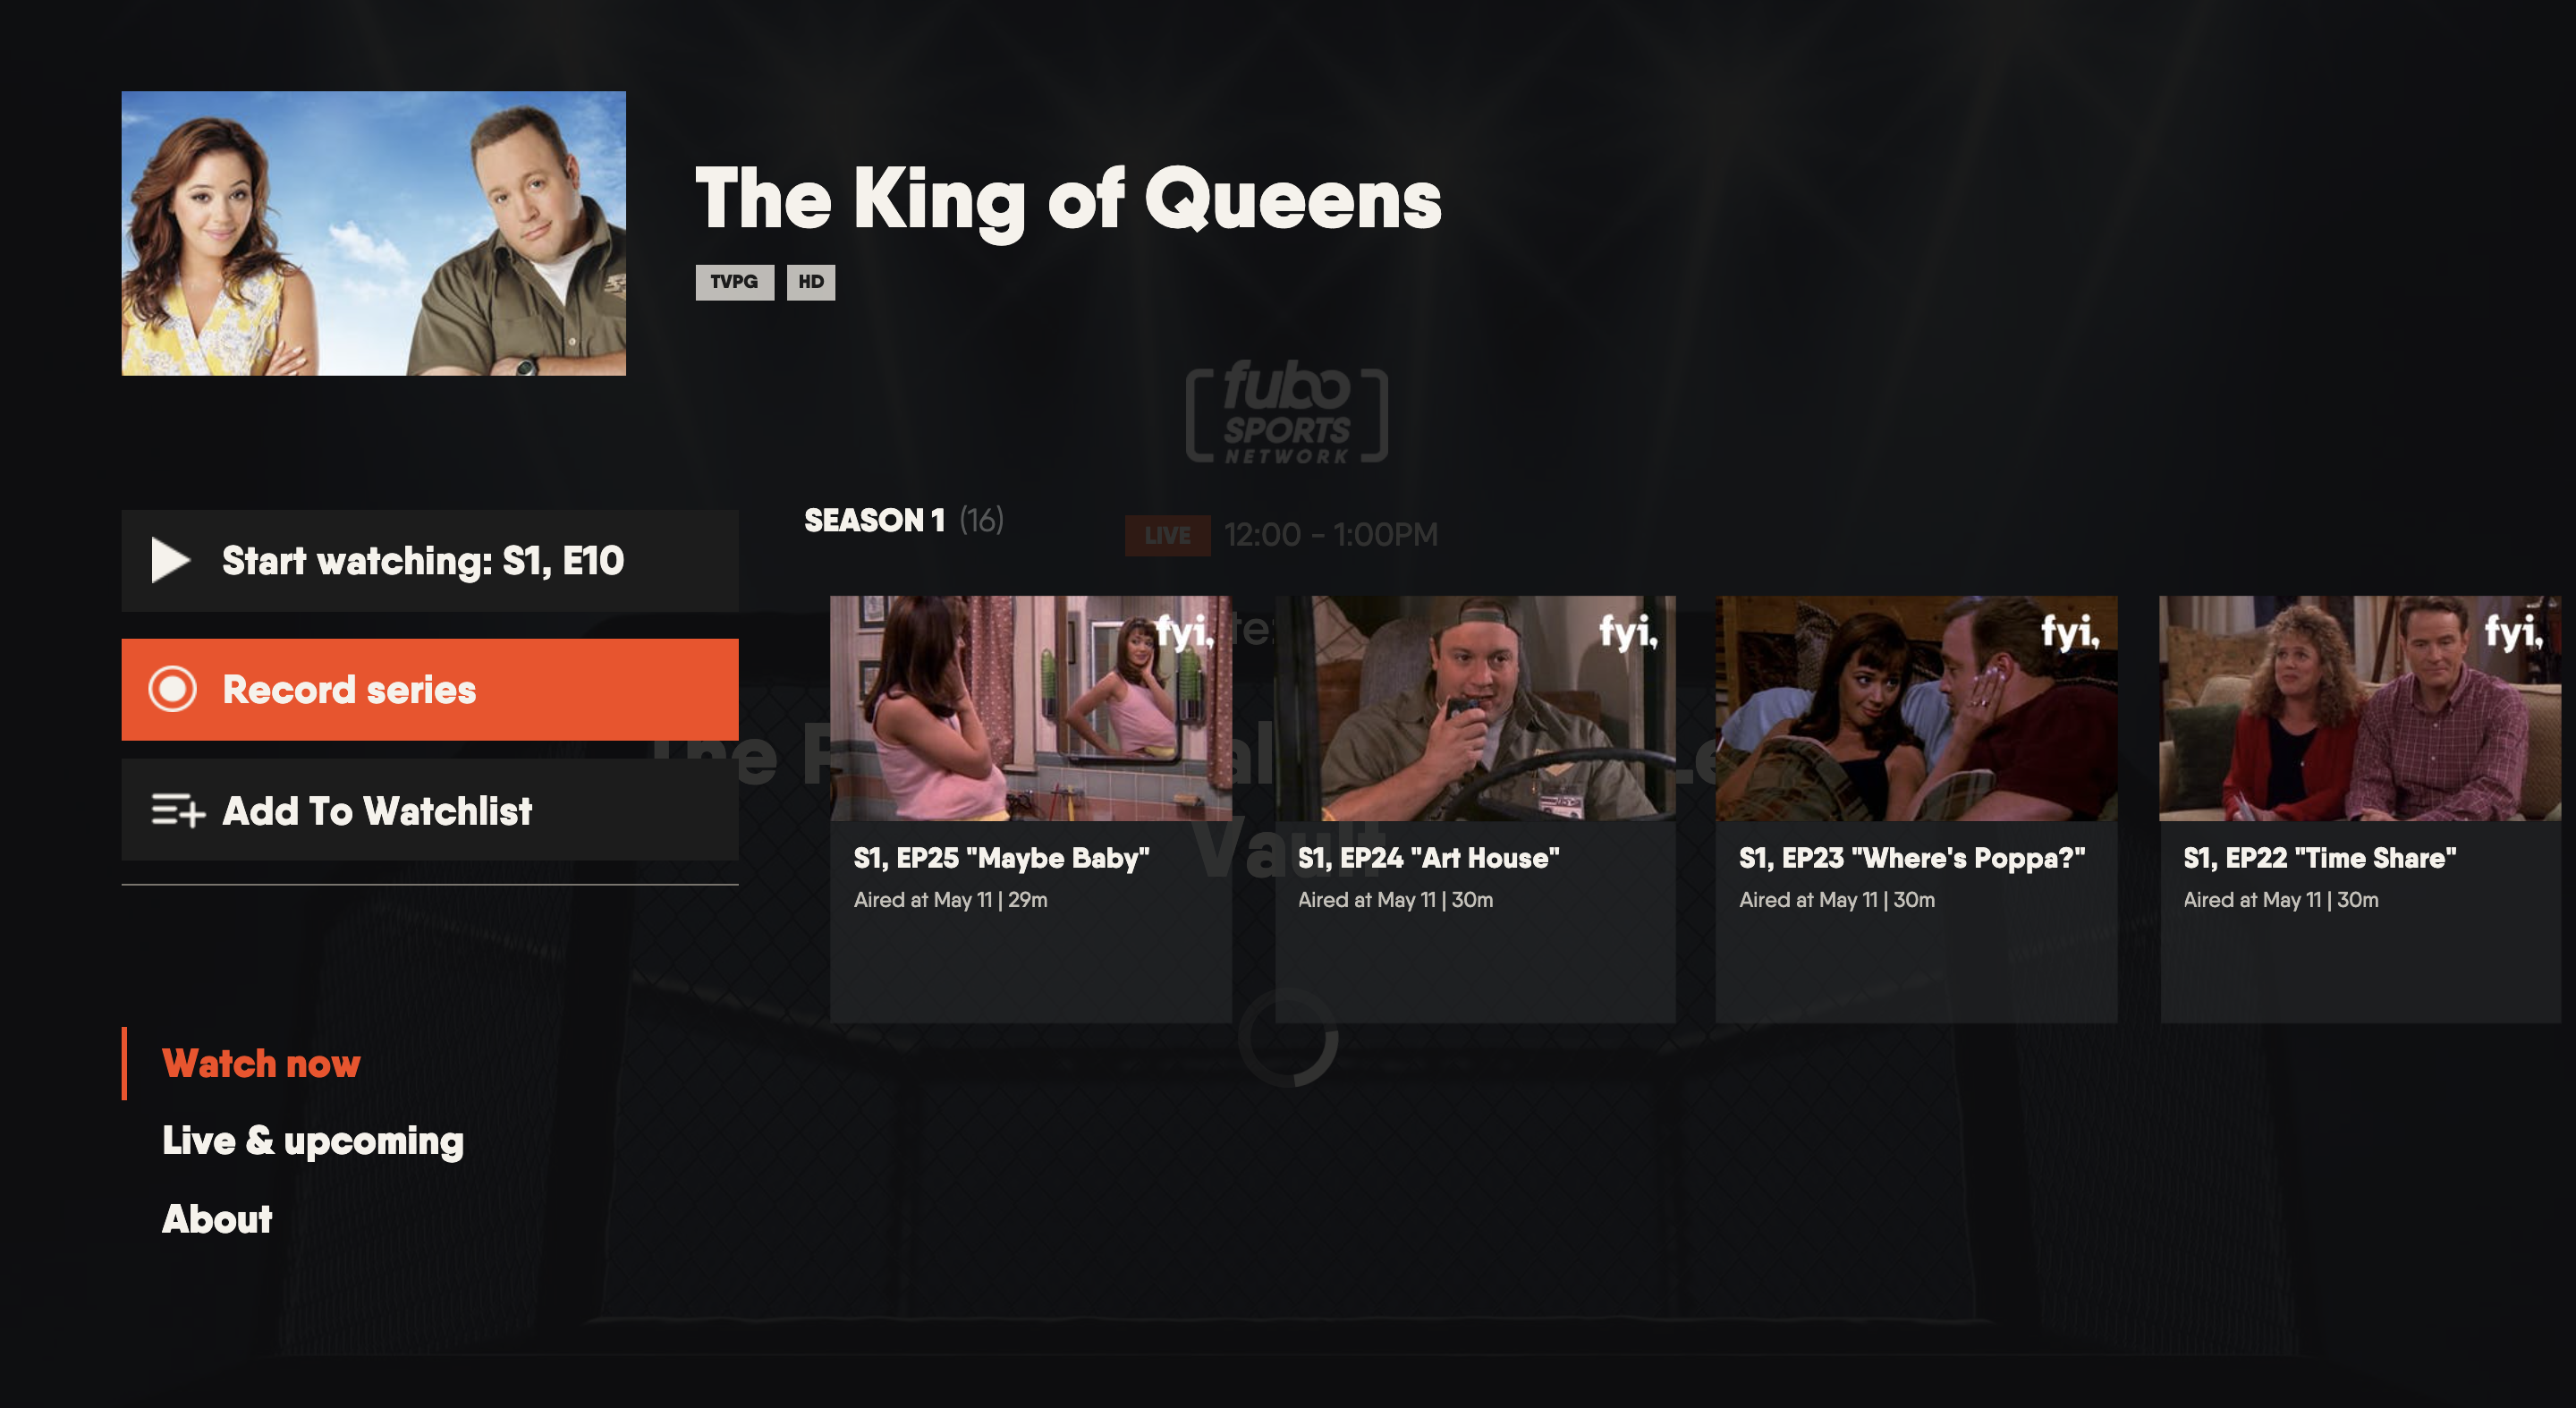 Series details page of the FuboTV app on LG TV with RECORD SERIES button highlighted